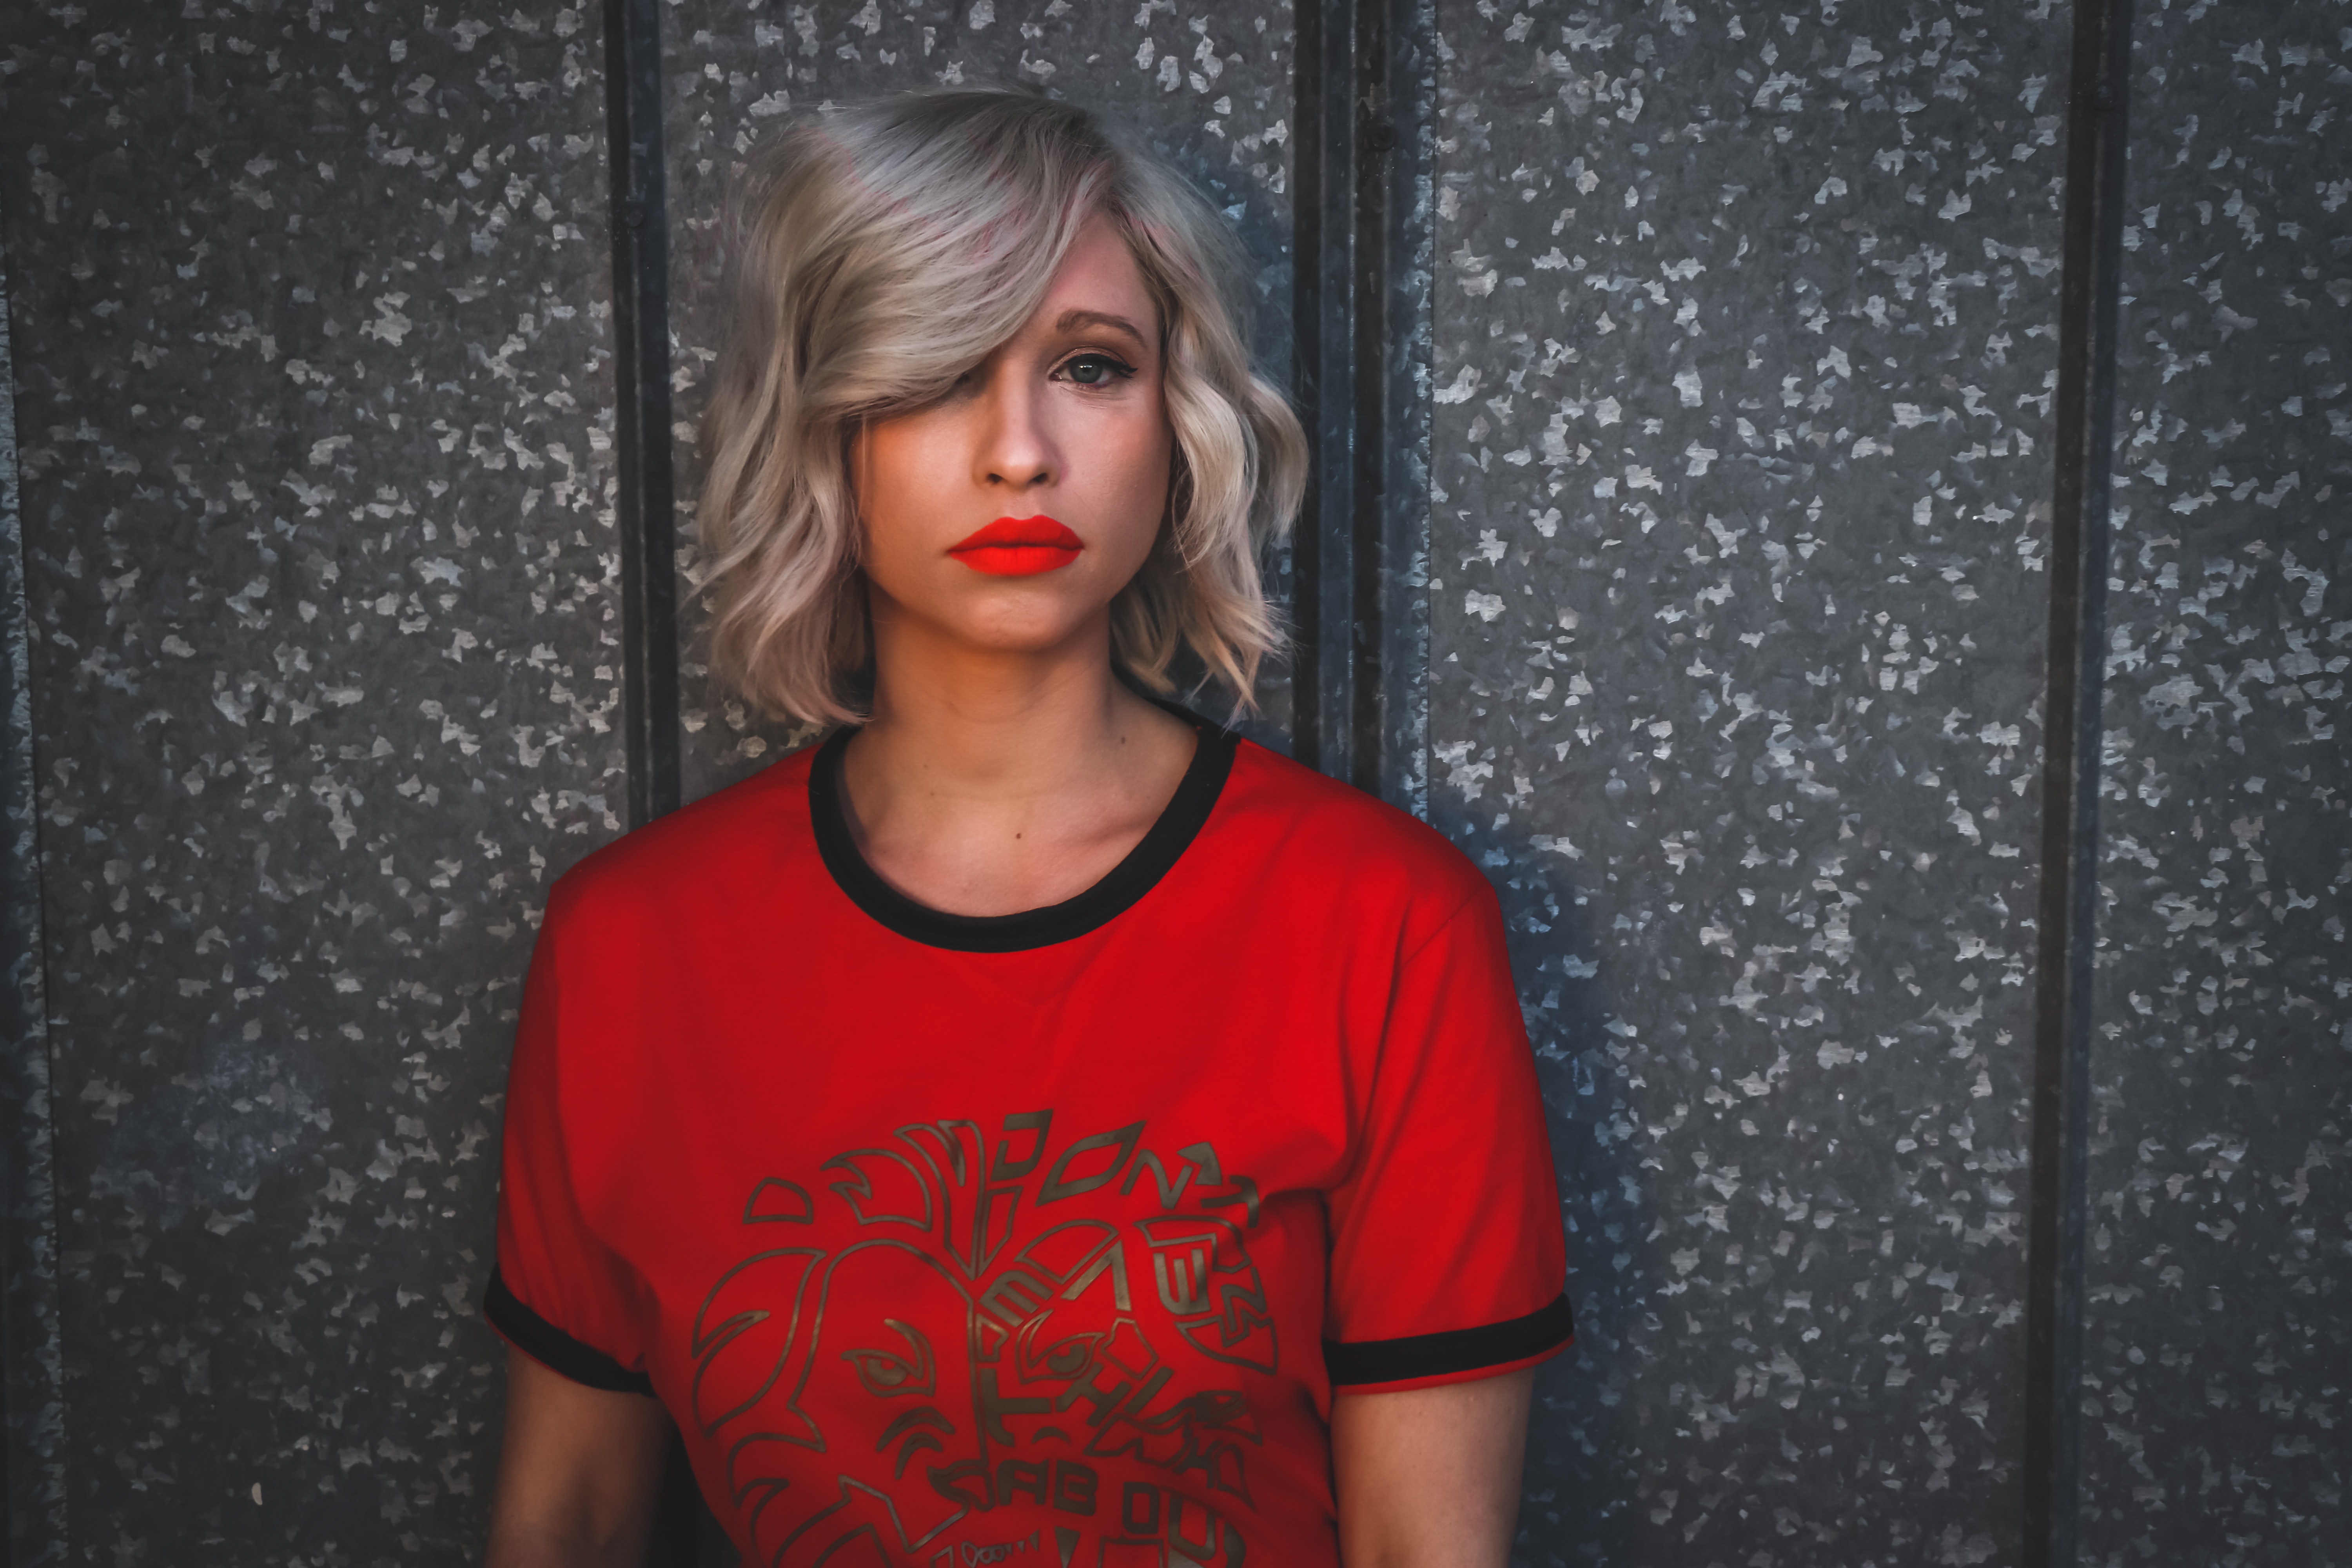 Woman wearing red shirt with red lipstick photo